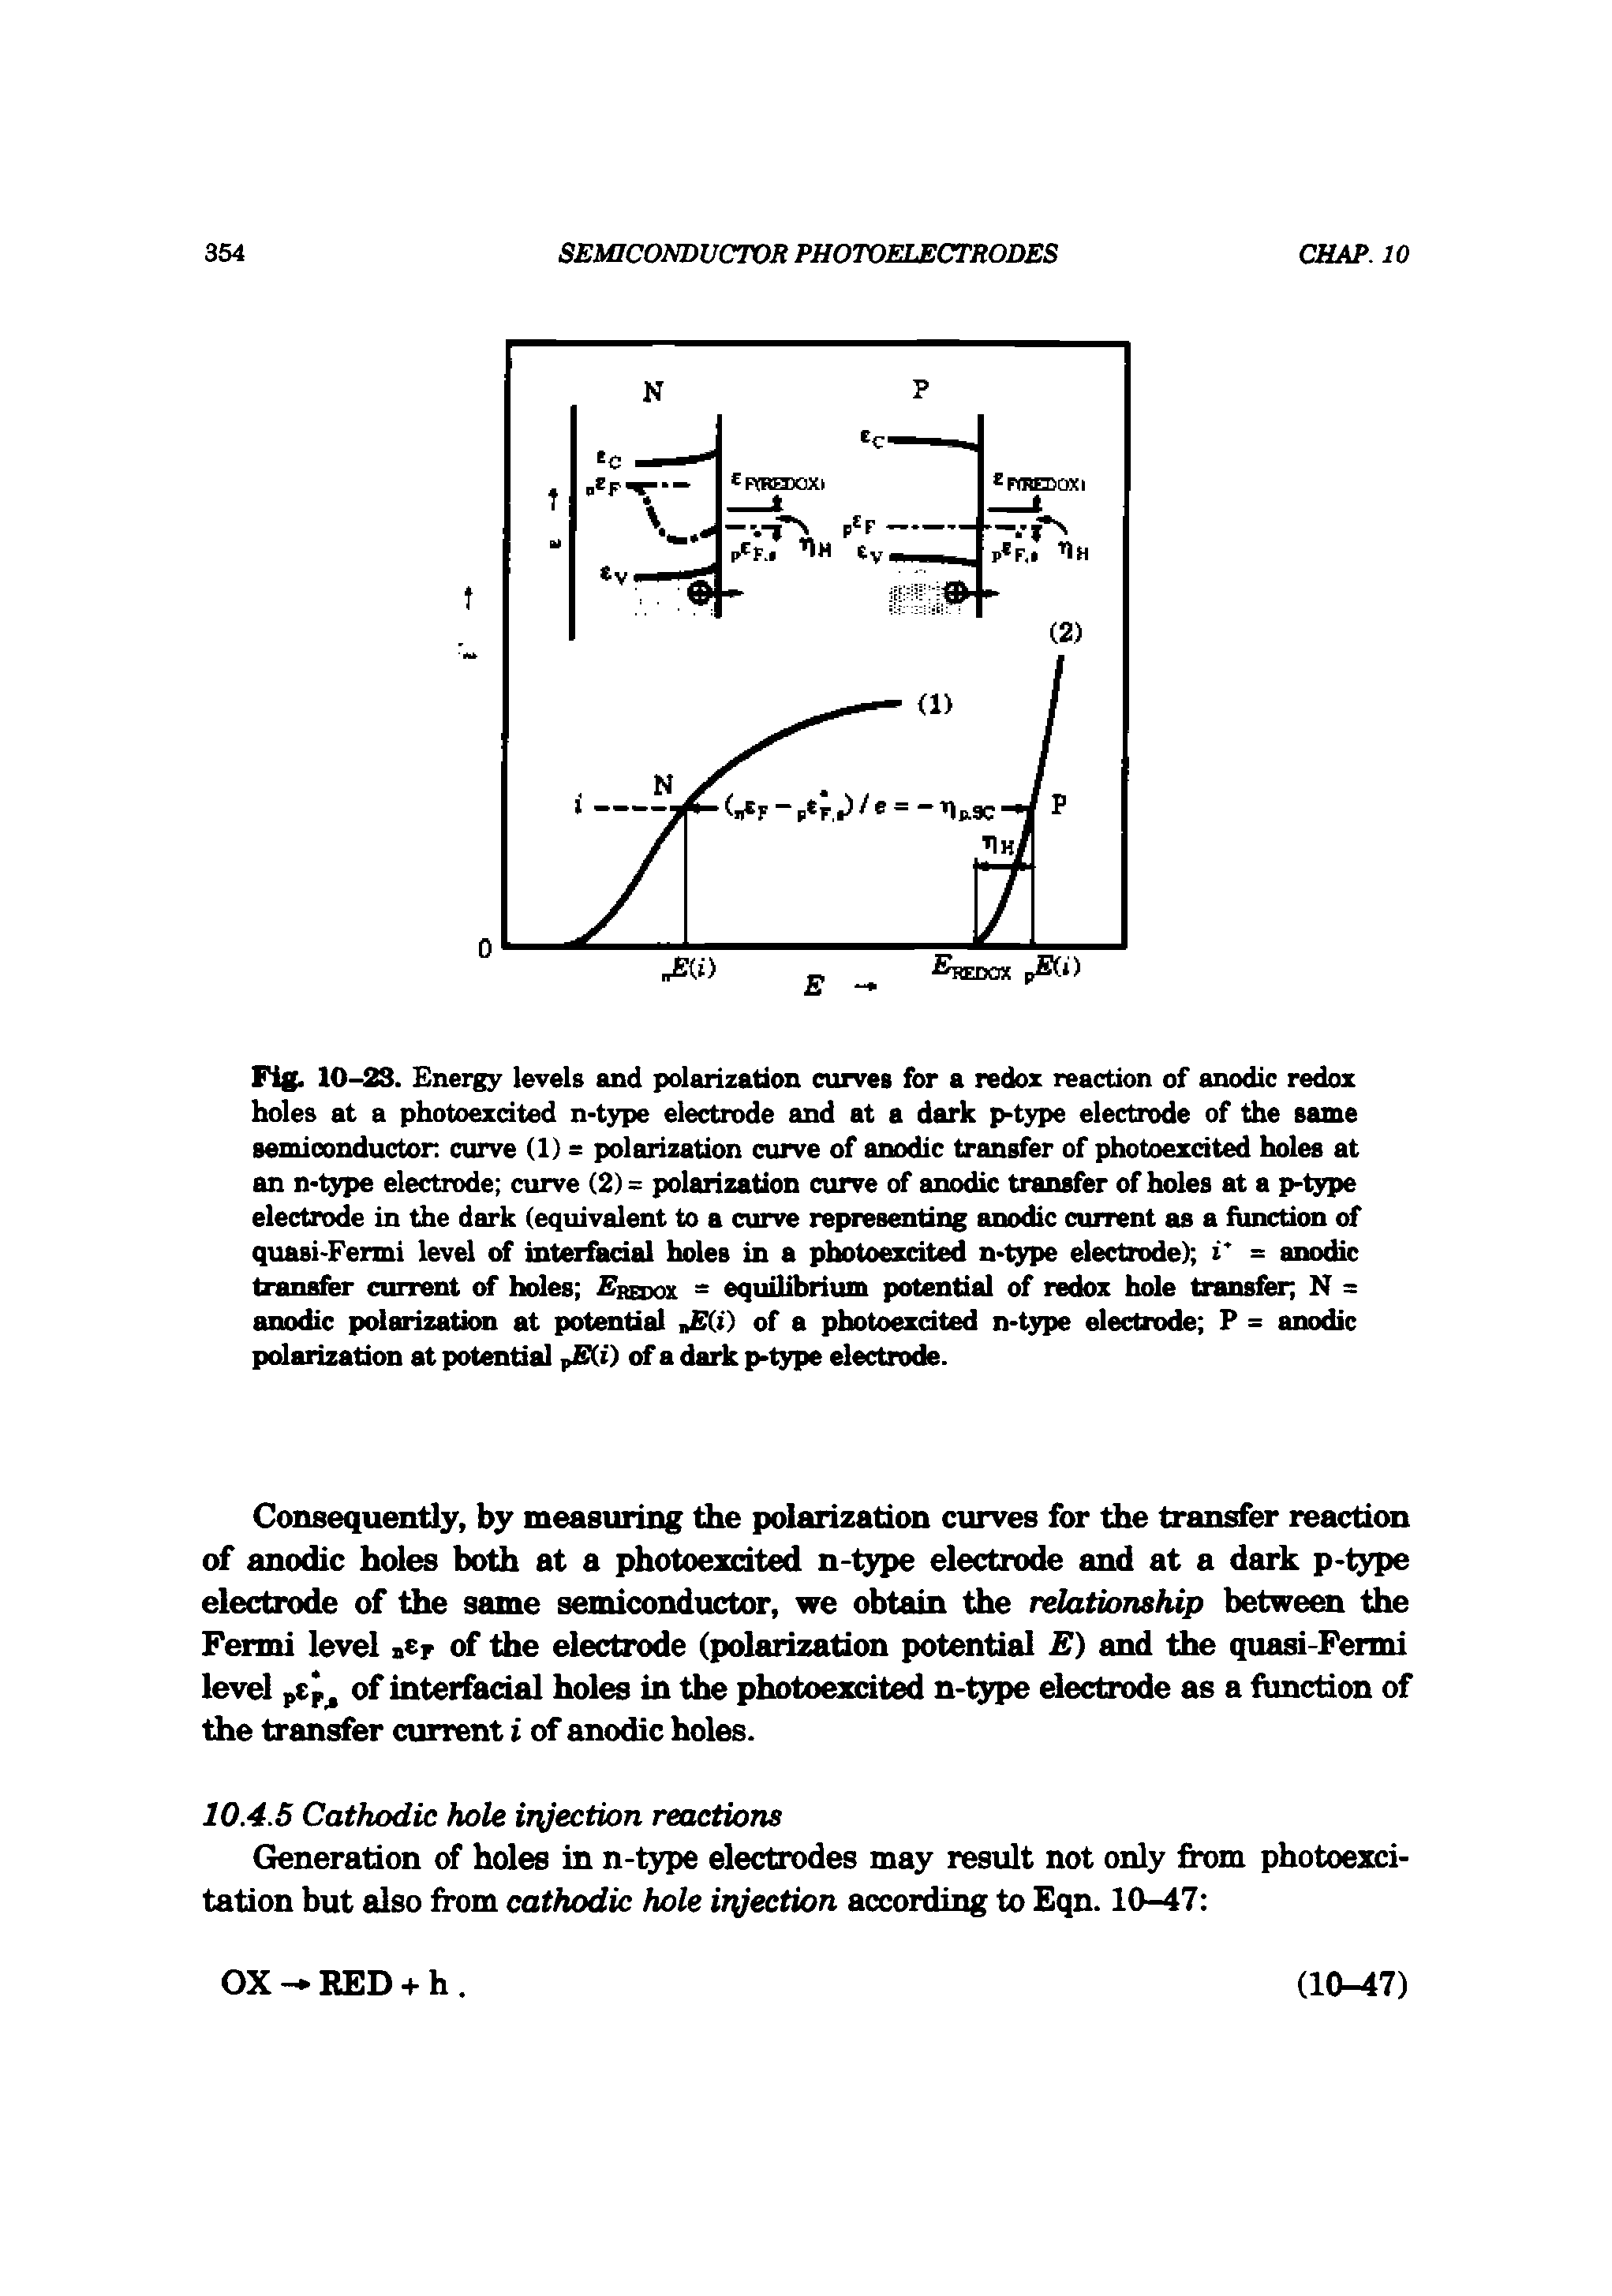 Fig. 10-23. Energy levels and polarization curves for a redox reaction of anodic redox holes at a photoexdted n-type electrode and at a dark p-type electrode of the same semiconductor curve (1) = polarization curve of anodic transfer of photoexdted holes at an n-type electrode curve (2)= polarization curve of anodic transfer of holes at a p-type electrode in the dark (equivalent to a curve representing anodic current as a function of quasi-Fermi level of interfadal holes in a photoexdted n-type electrode) i = anodic transfer current of holes Eredox = equilibriiun potential of redox hole transfer N = anodic polarization at potential n (t) of a photoexdted n-type electrode P = anodic polarization at potential pE(i) of a dark p-type electrode.